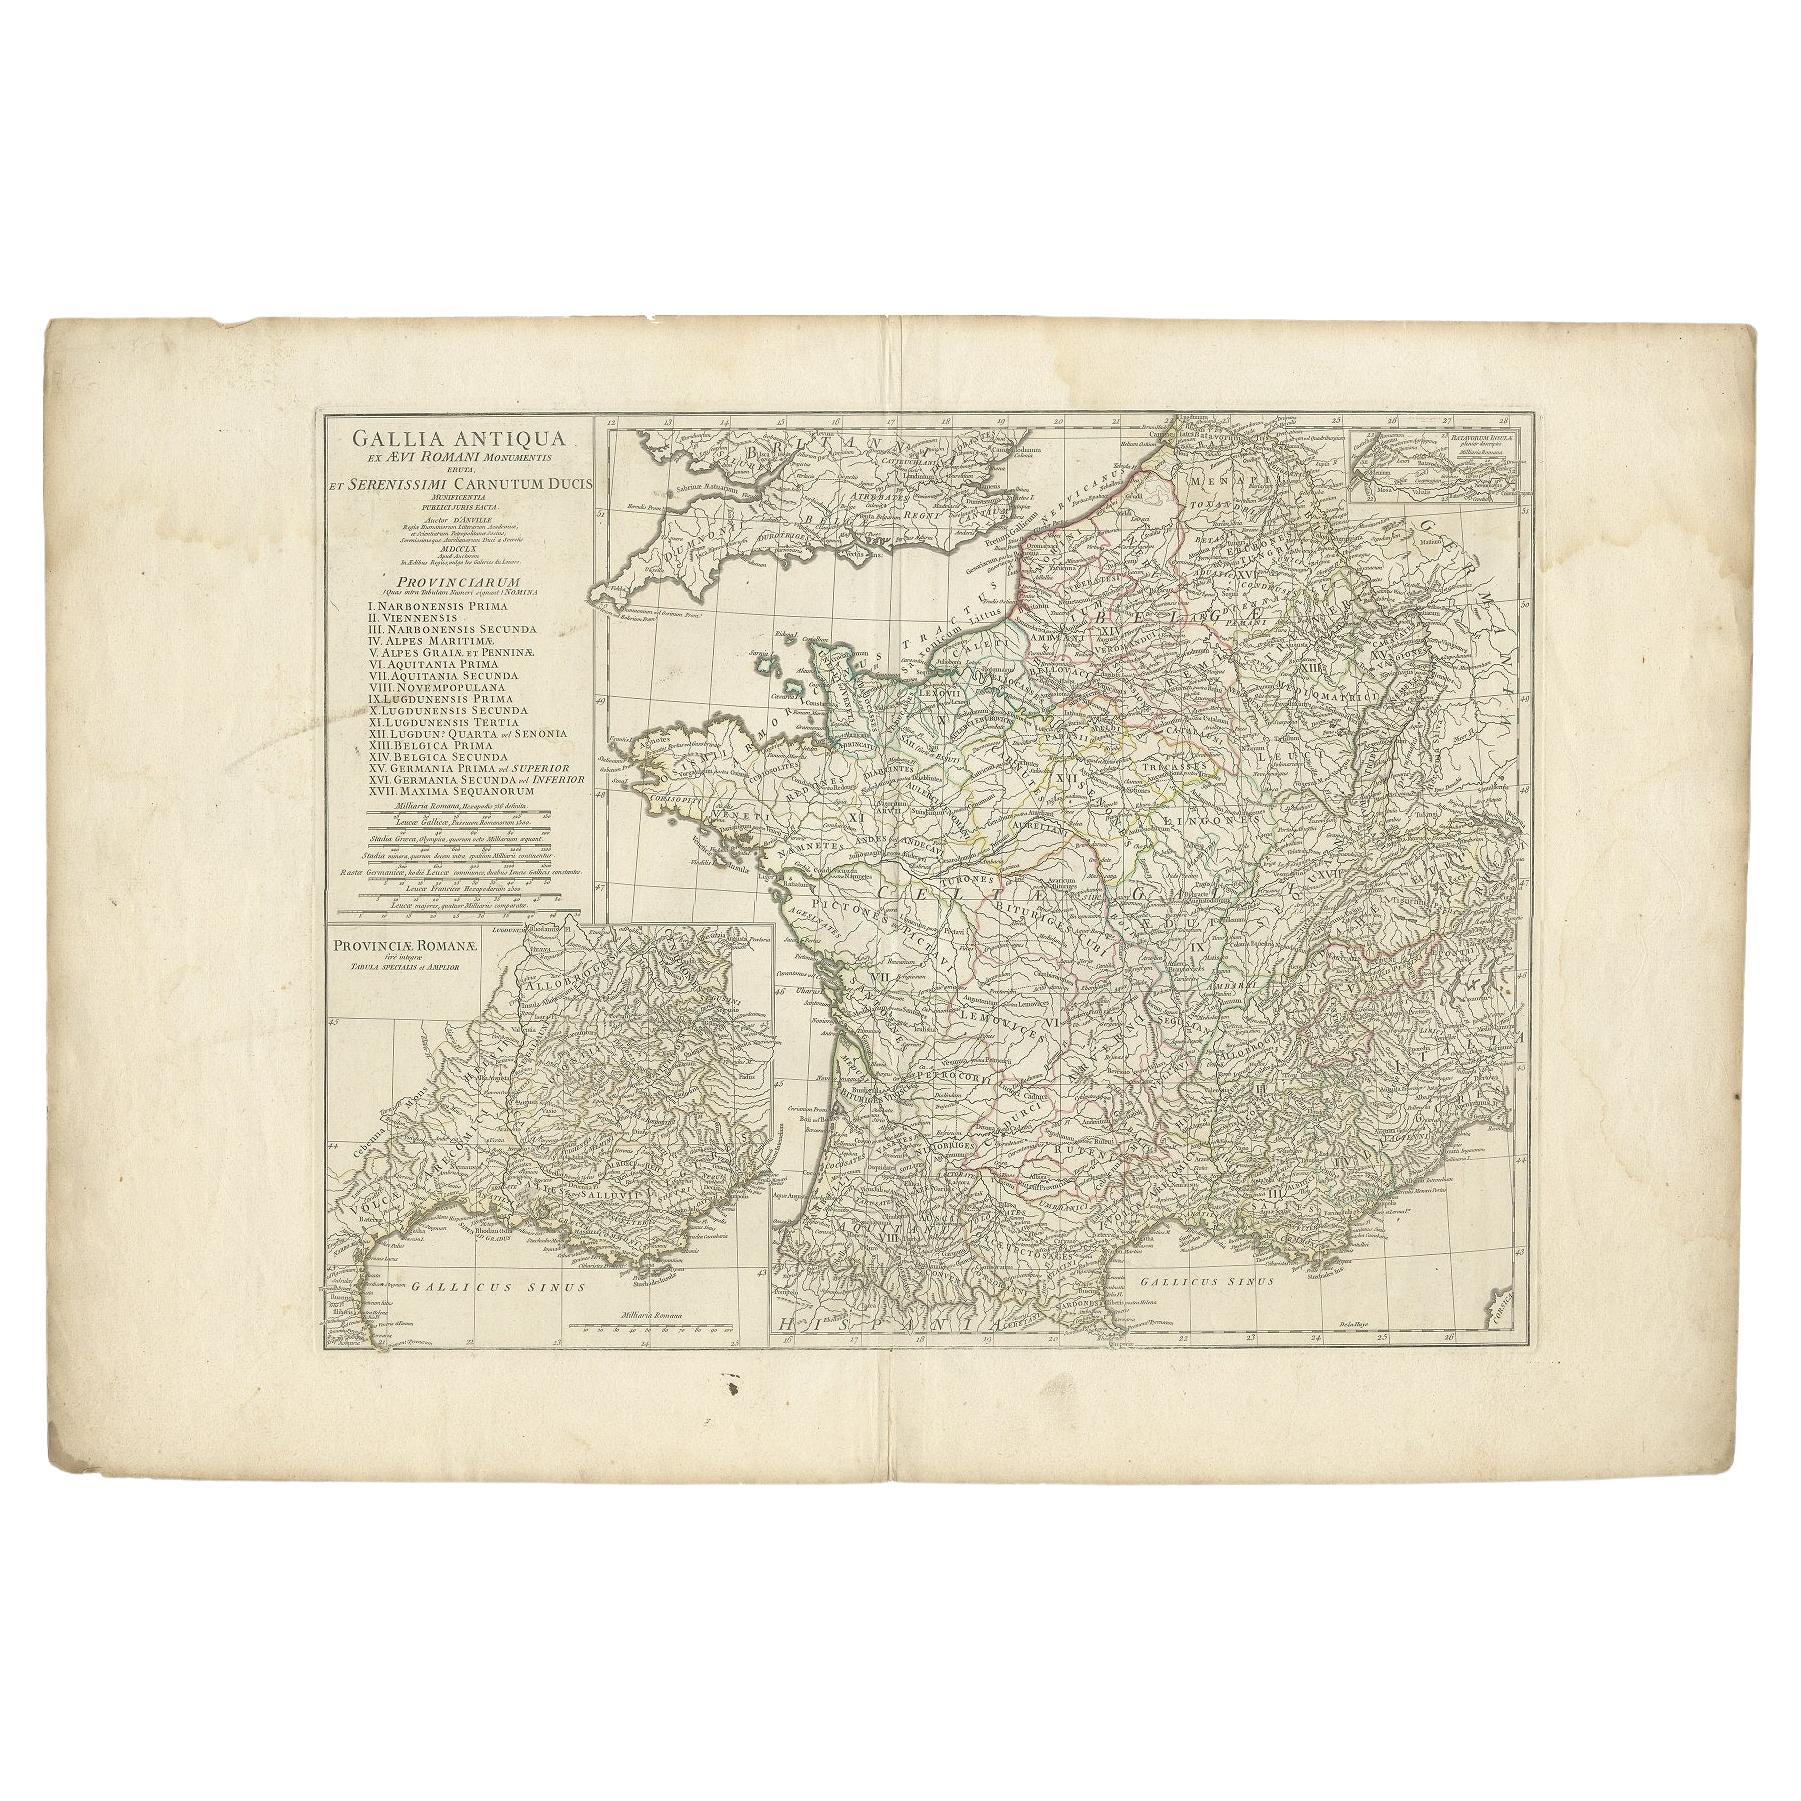 Original antique map titled 'Gallia Antiqua ex Aevi Romani Monumentis (..)'. Large map of Gaul, or France in ancient Roman times, showing Roman provinces. Inset bottom left a detailed map of Roman Provence. Published by D'Anville, circa 1760.